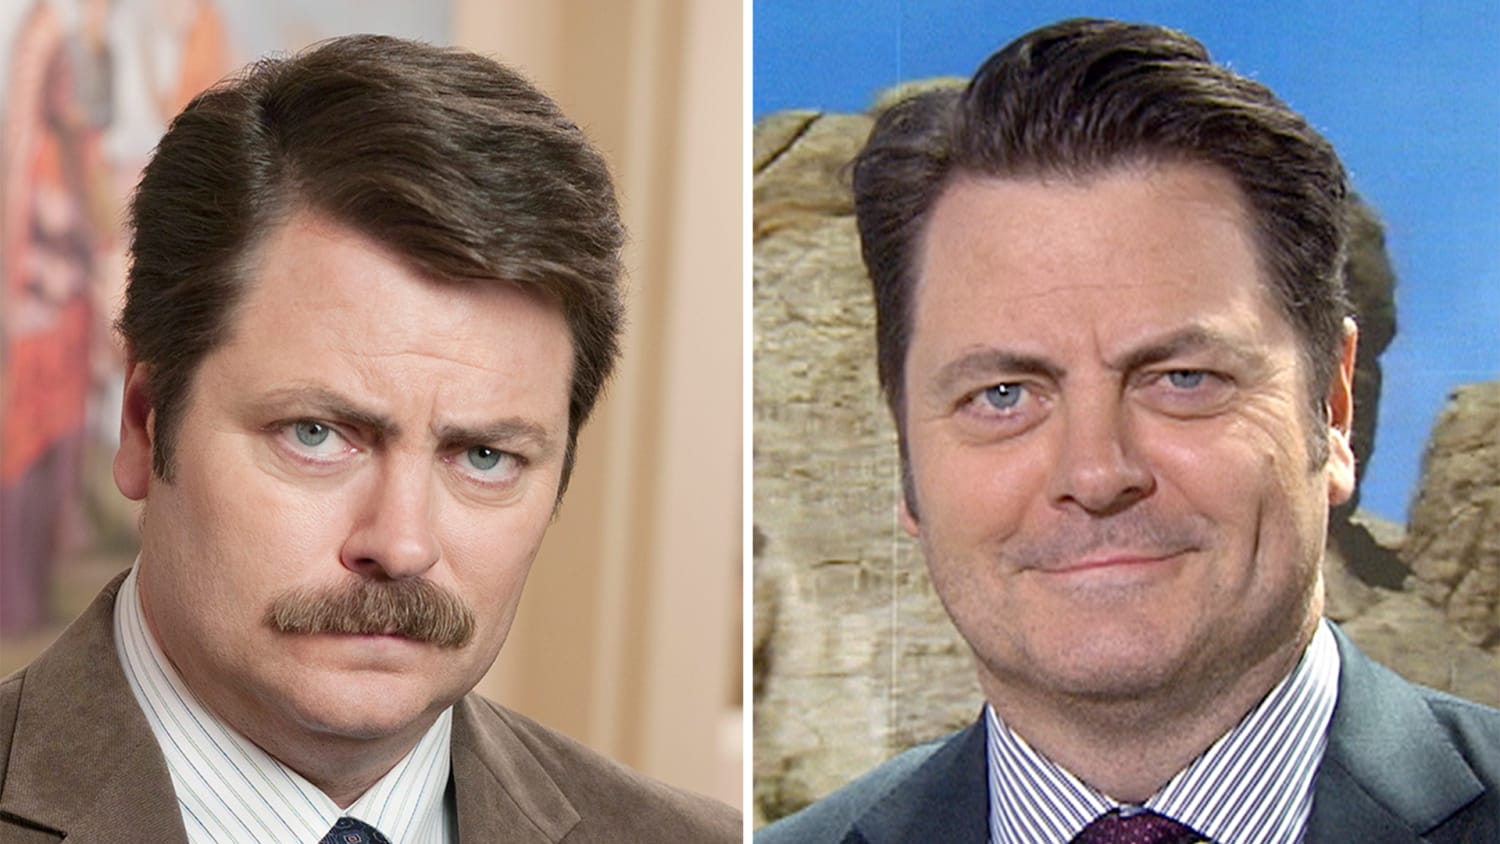 Nick Offerman addresses his missing mustache.